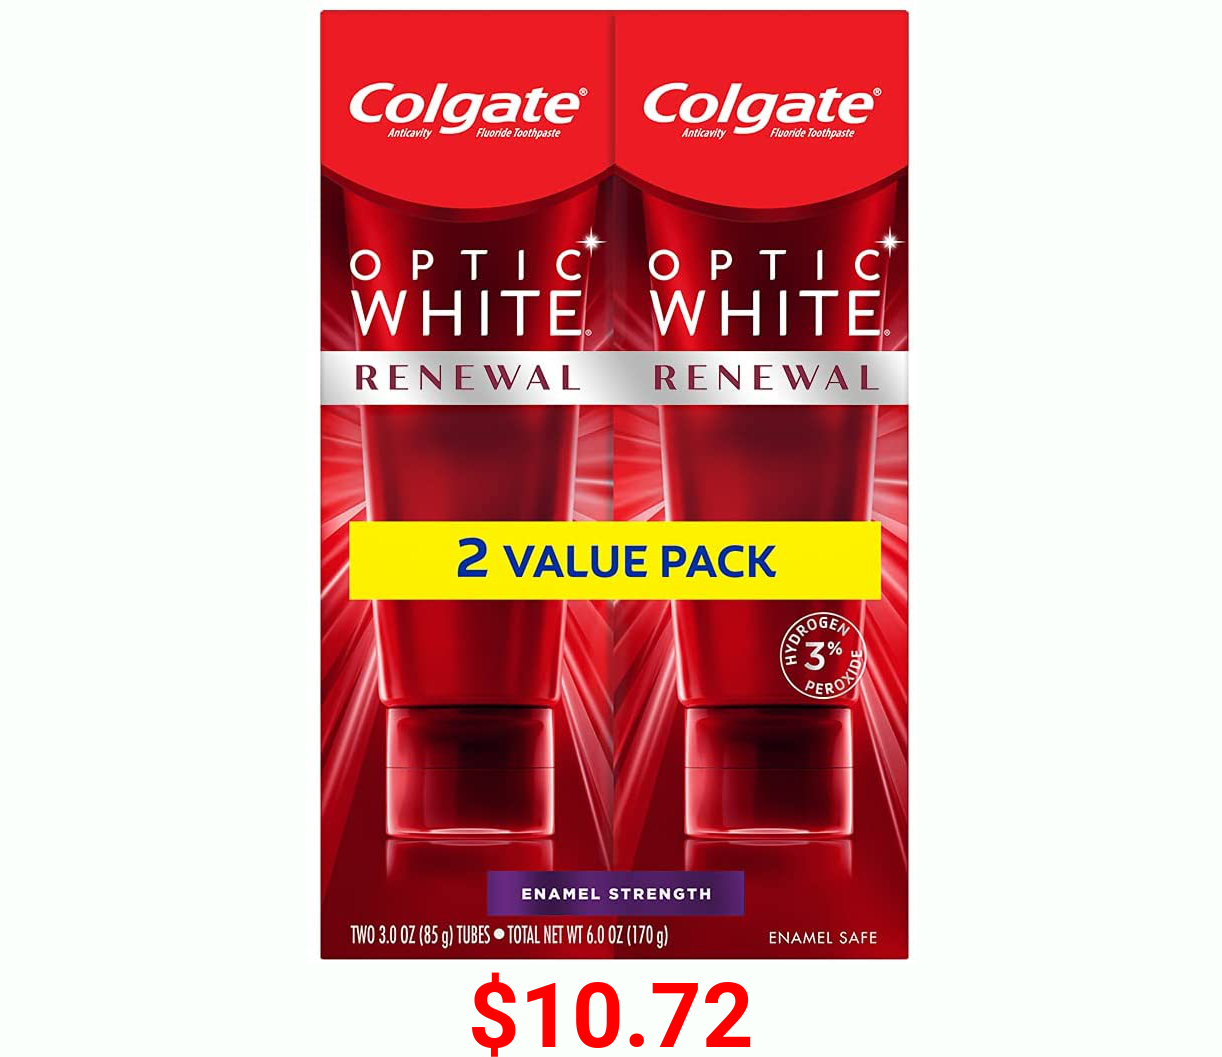 Colgate Optic Renewal Teeth Whitening Toothpaste with Fluoride Hydrogen Peroxide Enamel Strength, White, Wintergreen, 6 Ounce